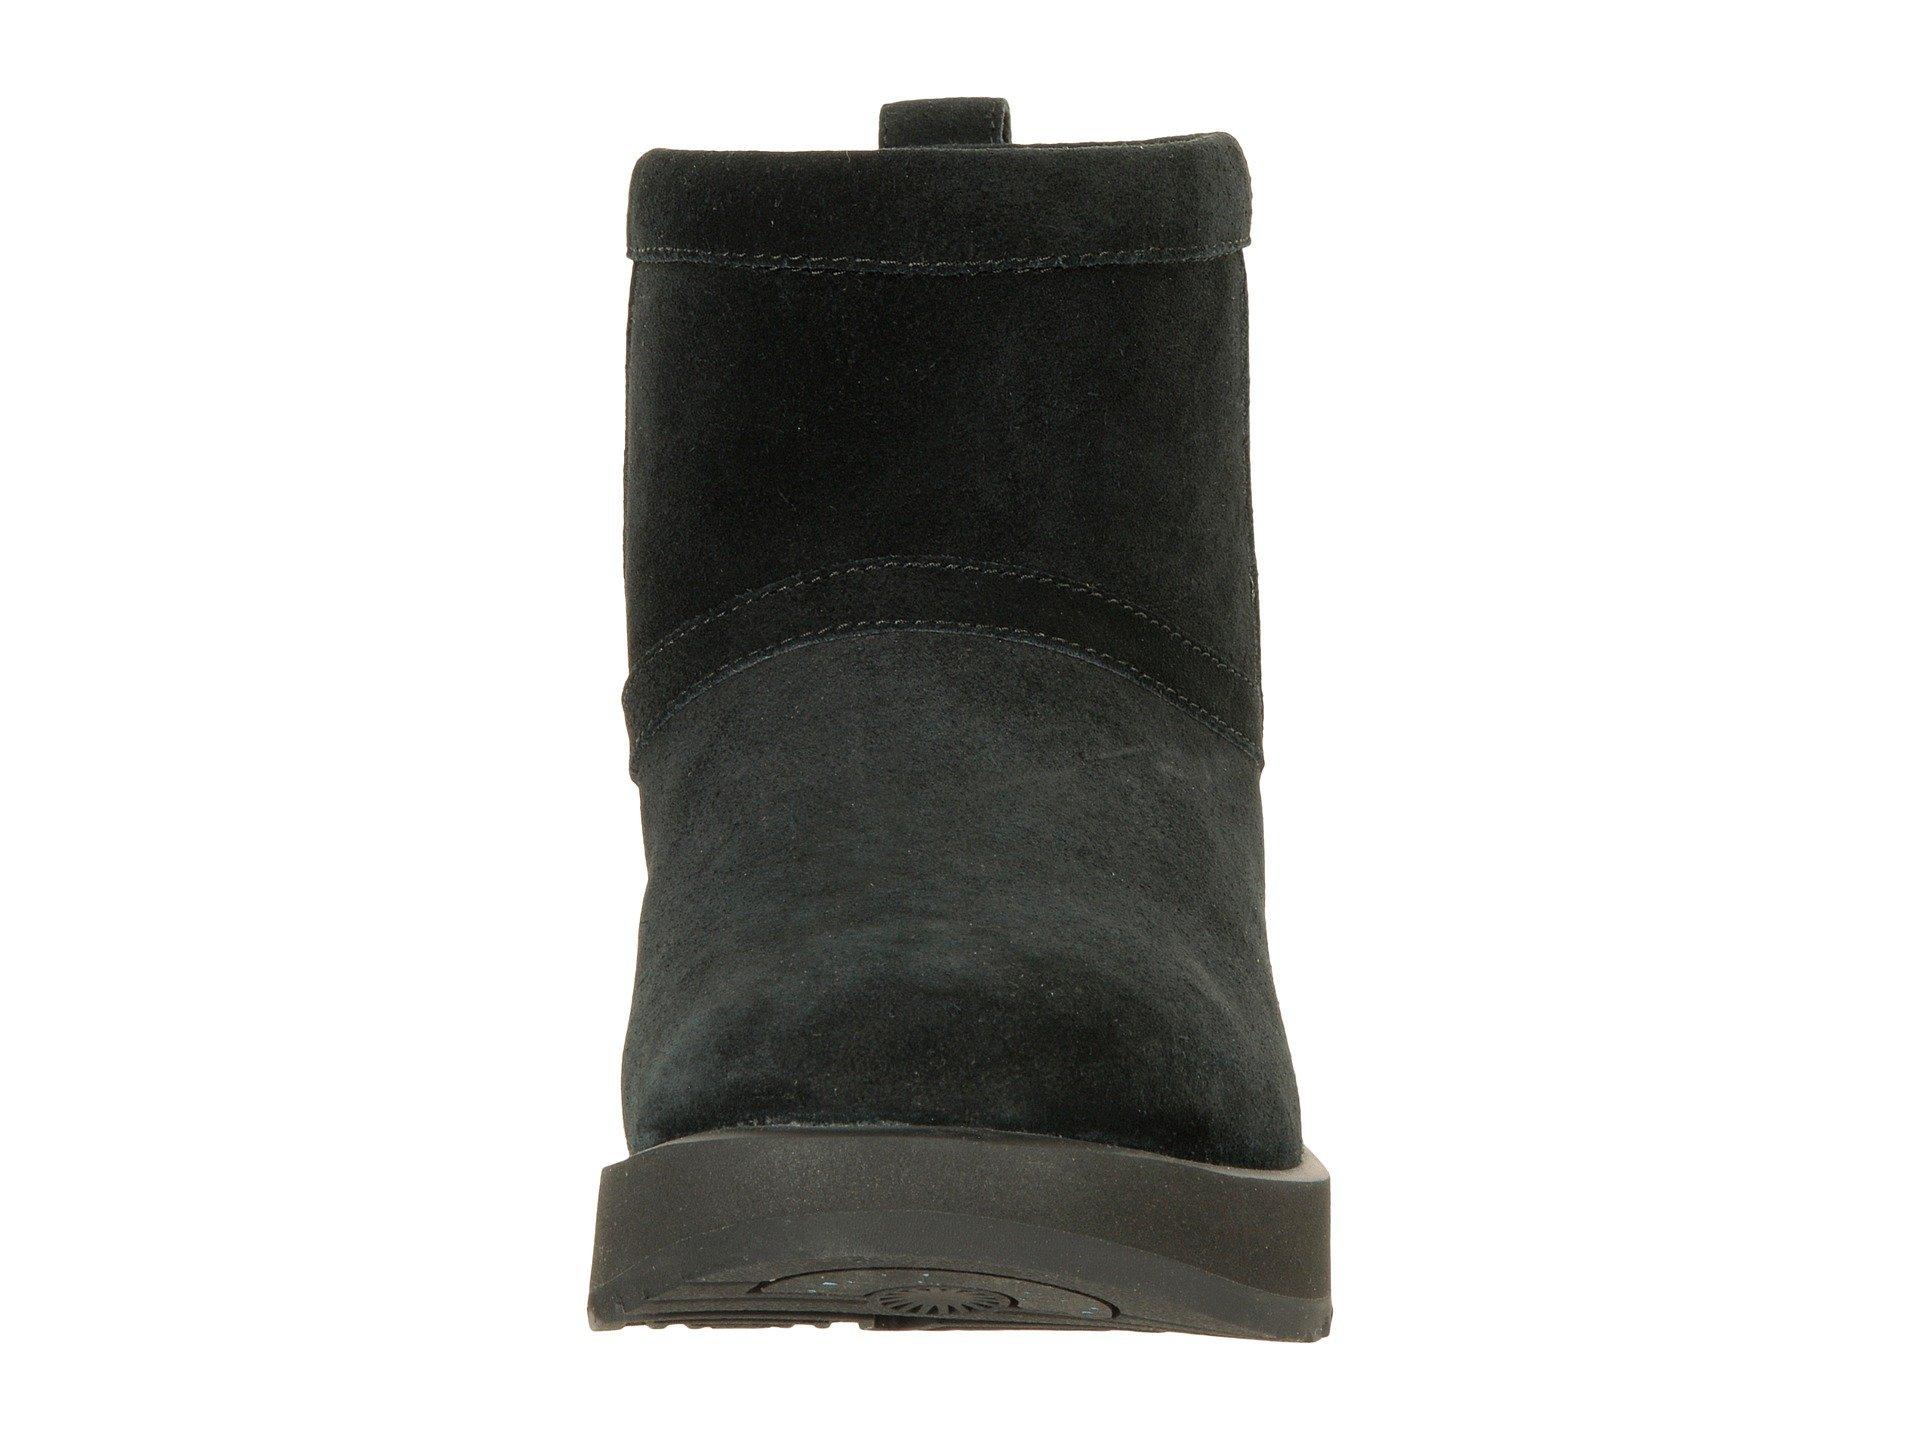 UGG Suede Classic Mini Leather Genuine Shearling Lined Waterproof Boot in  Black - Lyst